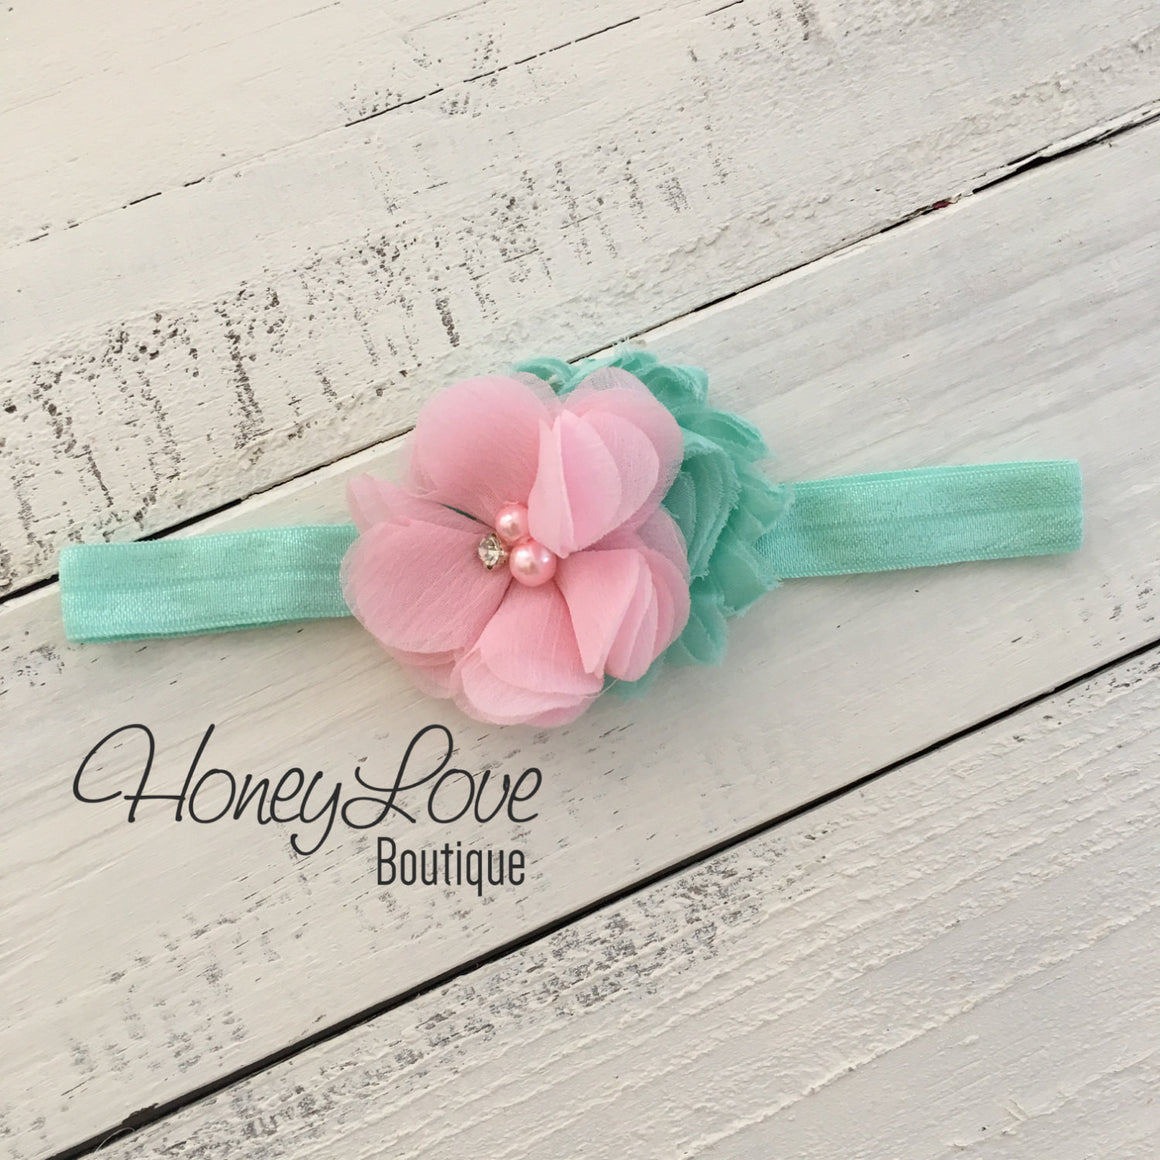 PERSONALIZED Name Outfit - Mint/Aqua and Gold Glitter - Light Pink flower embellished tutu skirt bloomers - HoneyLoveBoutique